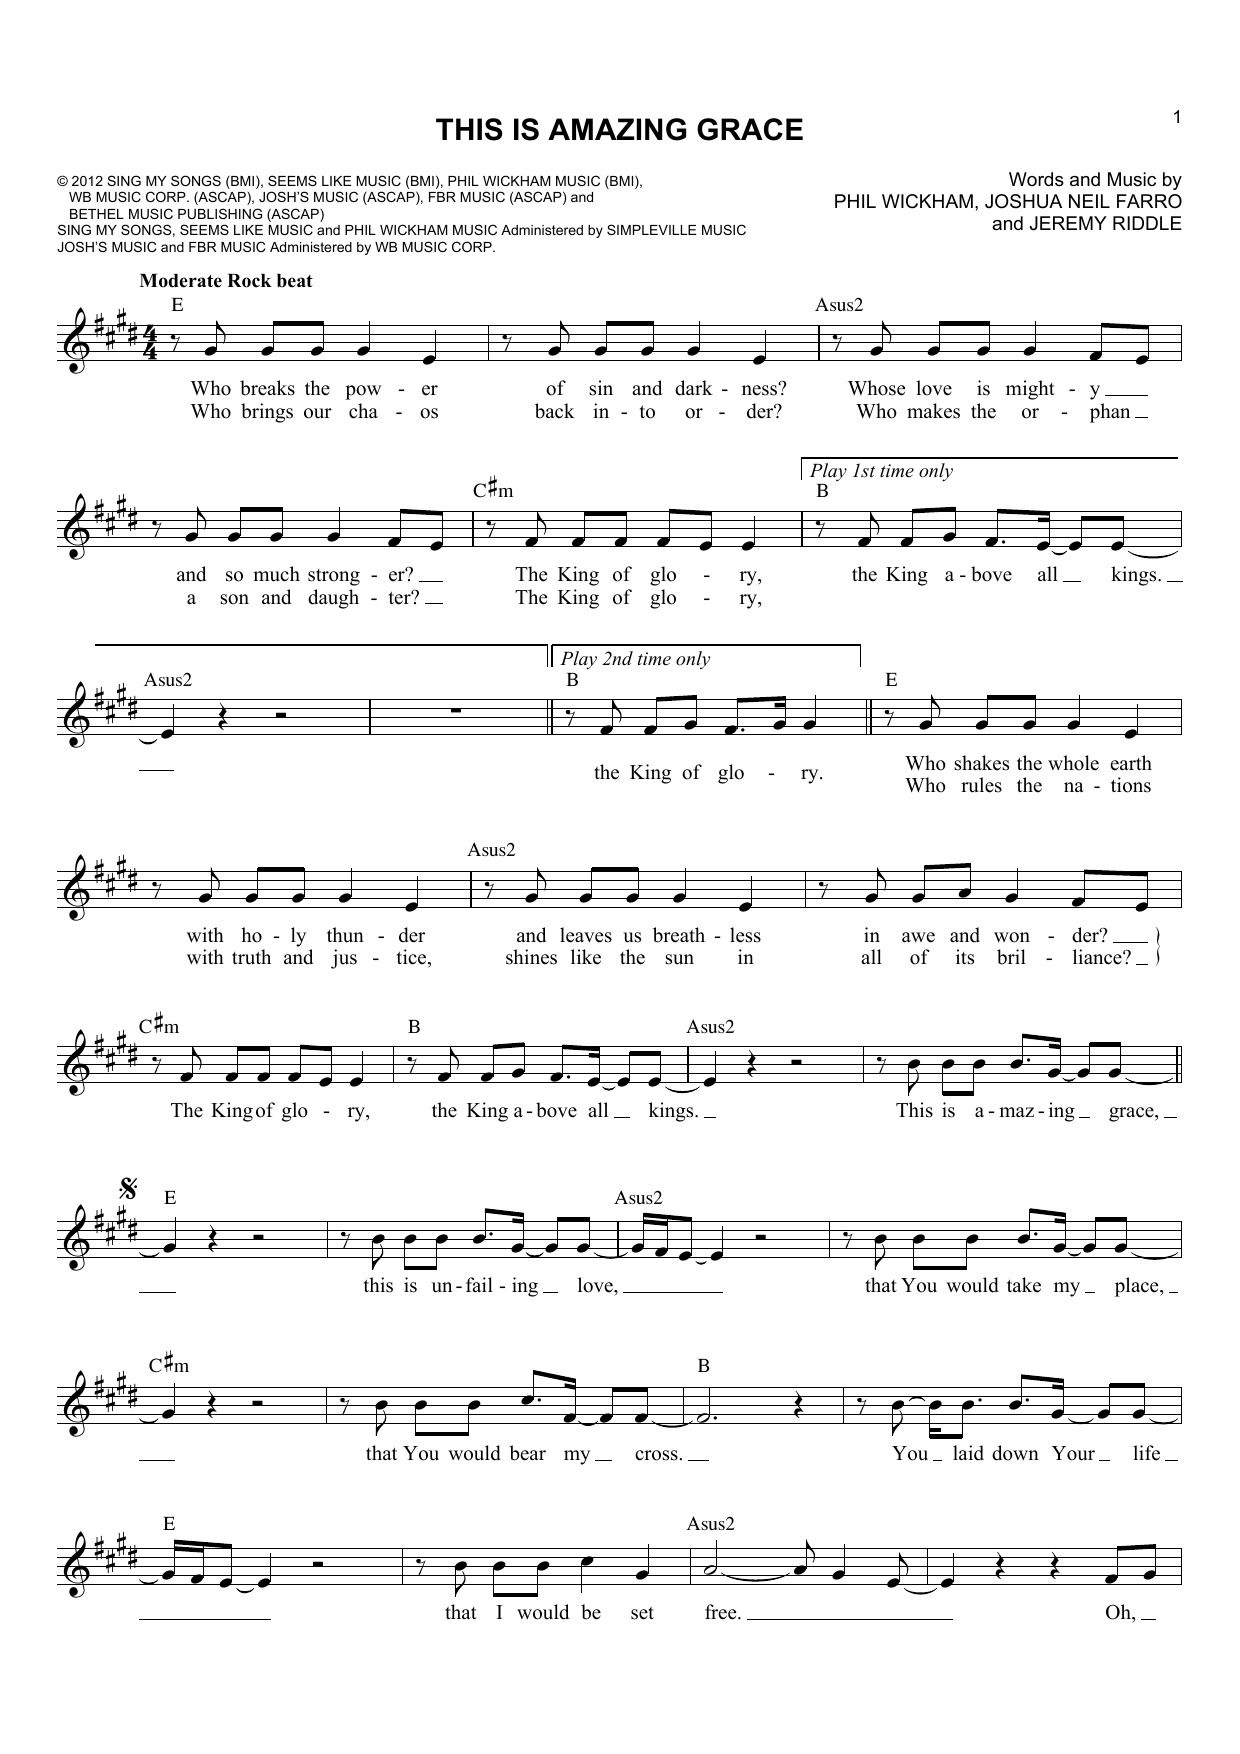 Download Phil Wickham This Is Amazing Grace Sheet Music